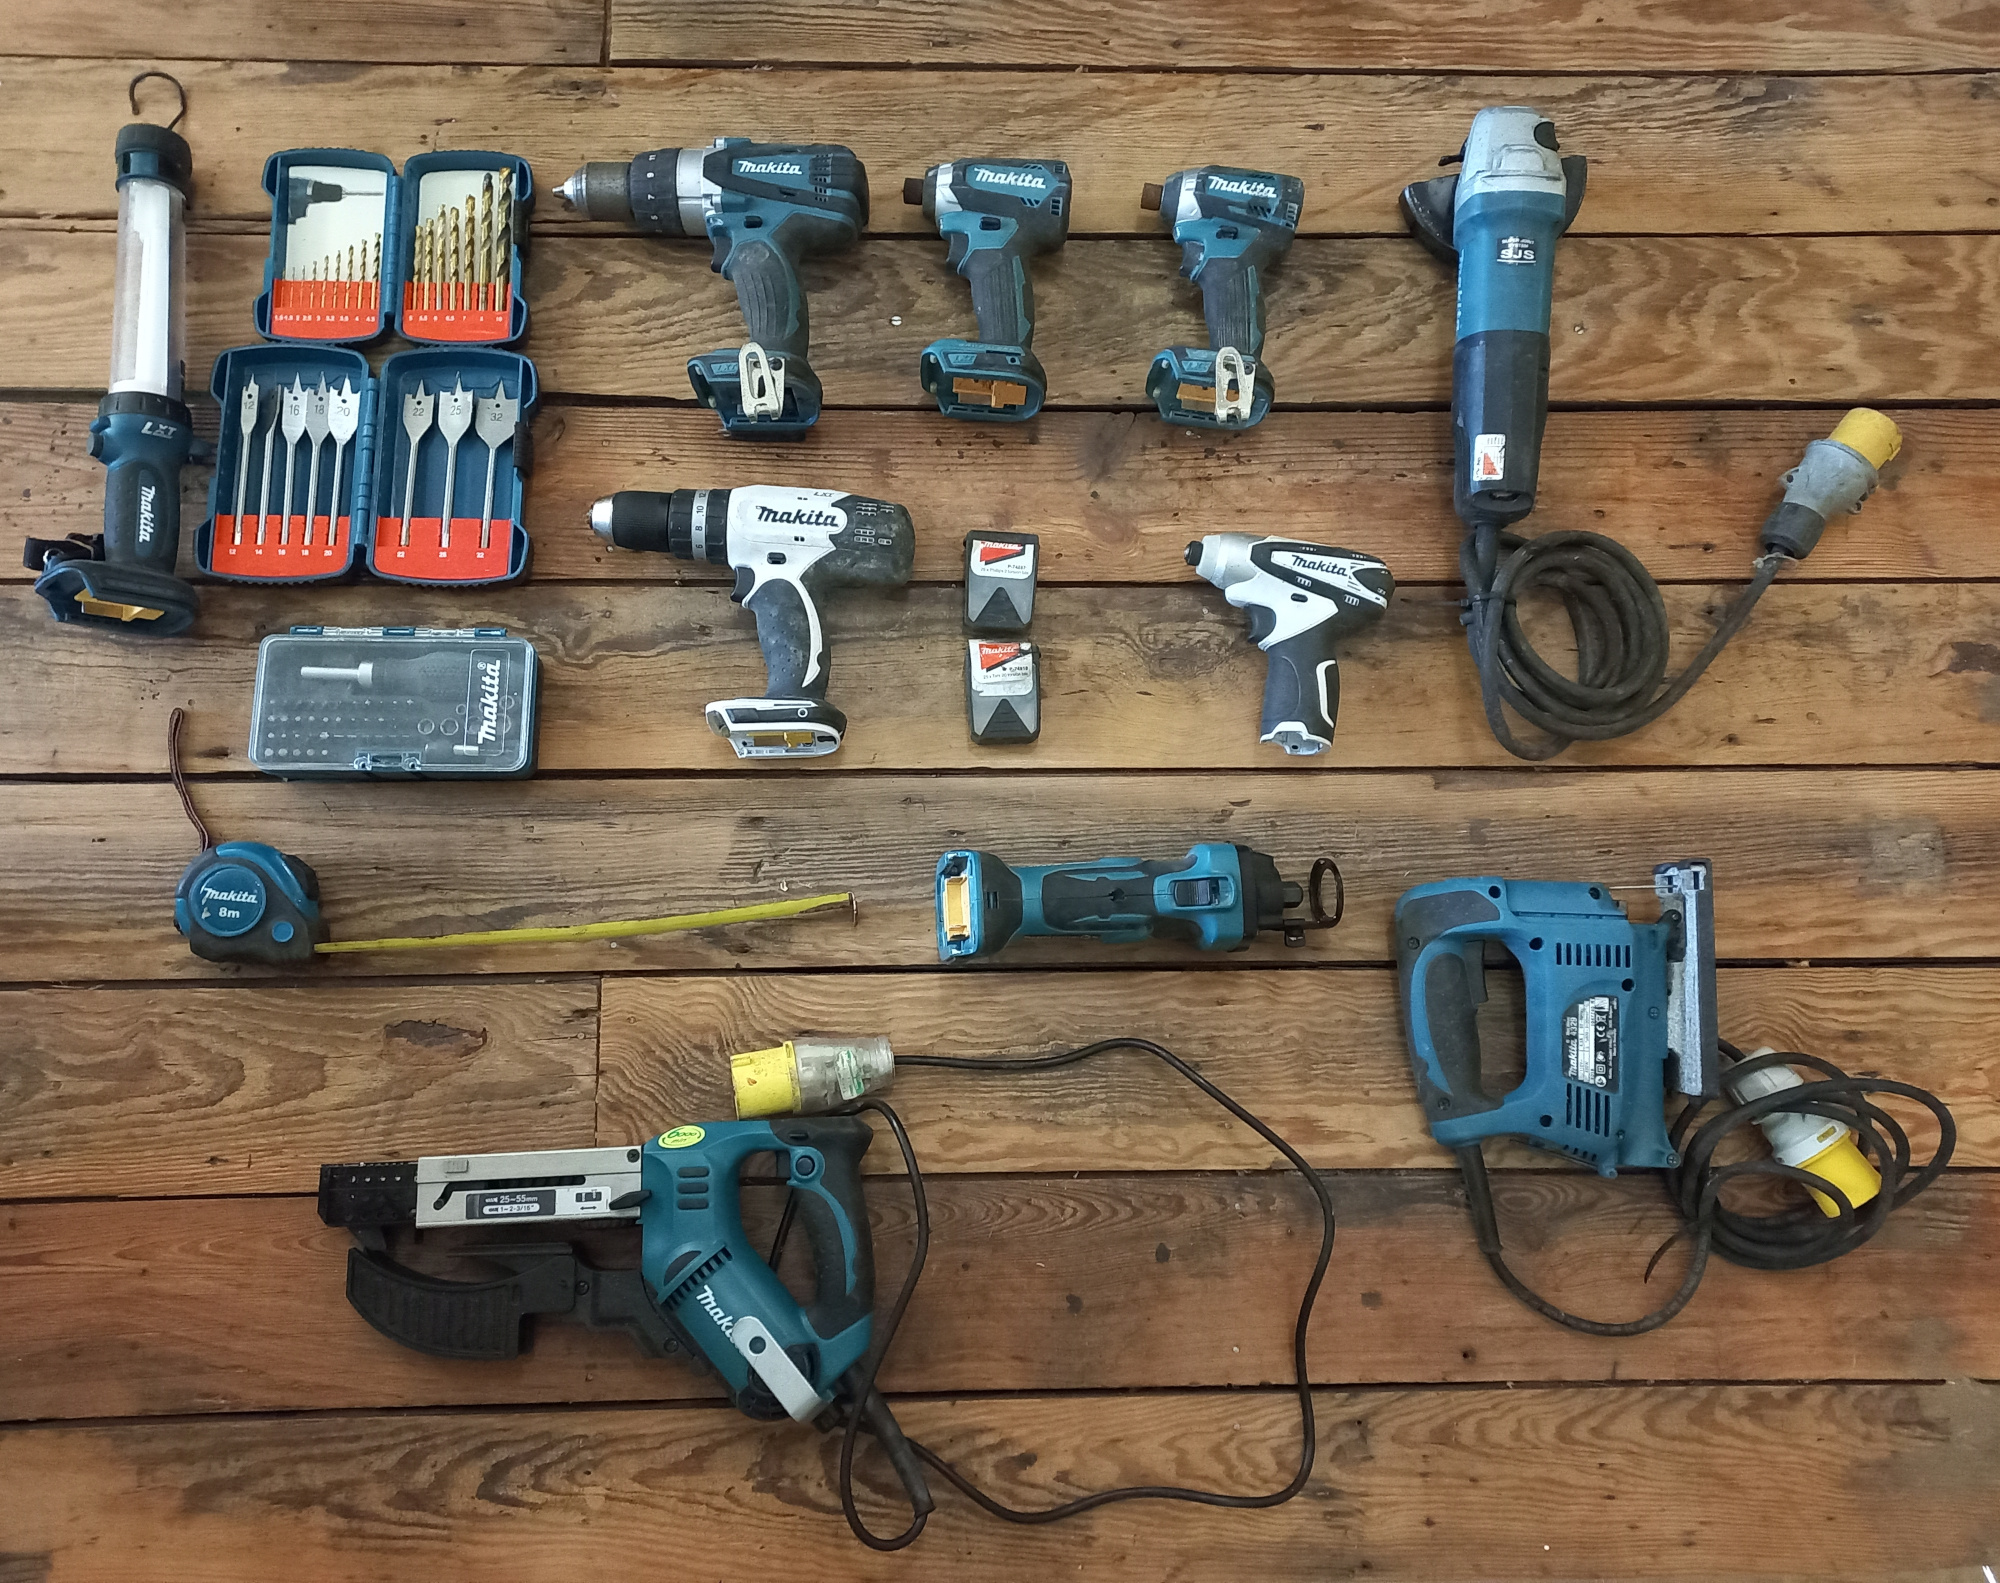 A large Makita carry bag with a quantity of power tools including nail gun, drills, jigsaw, angle - Bild 2 aus 2